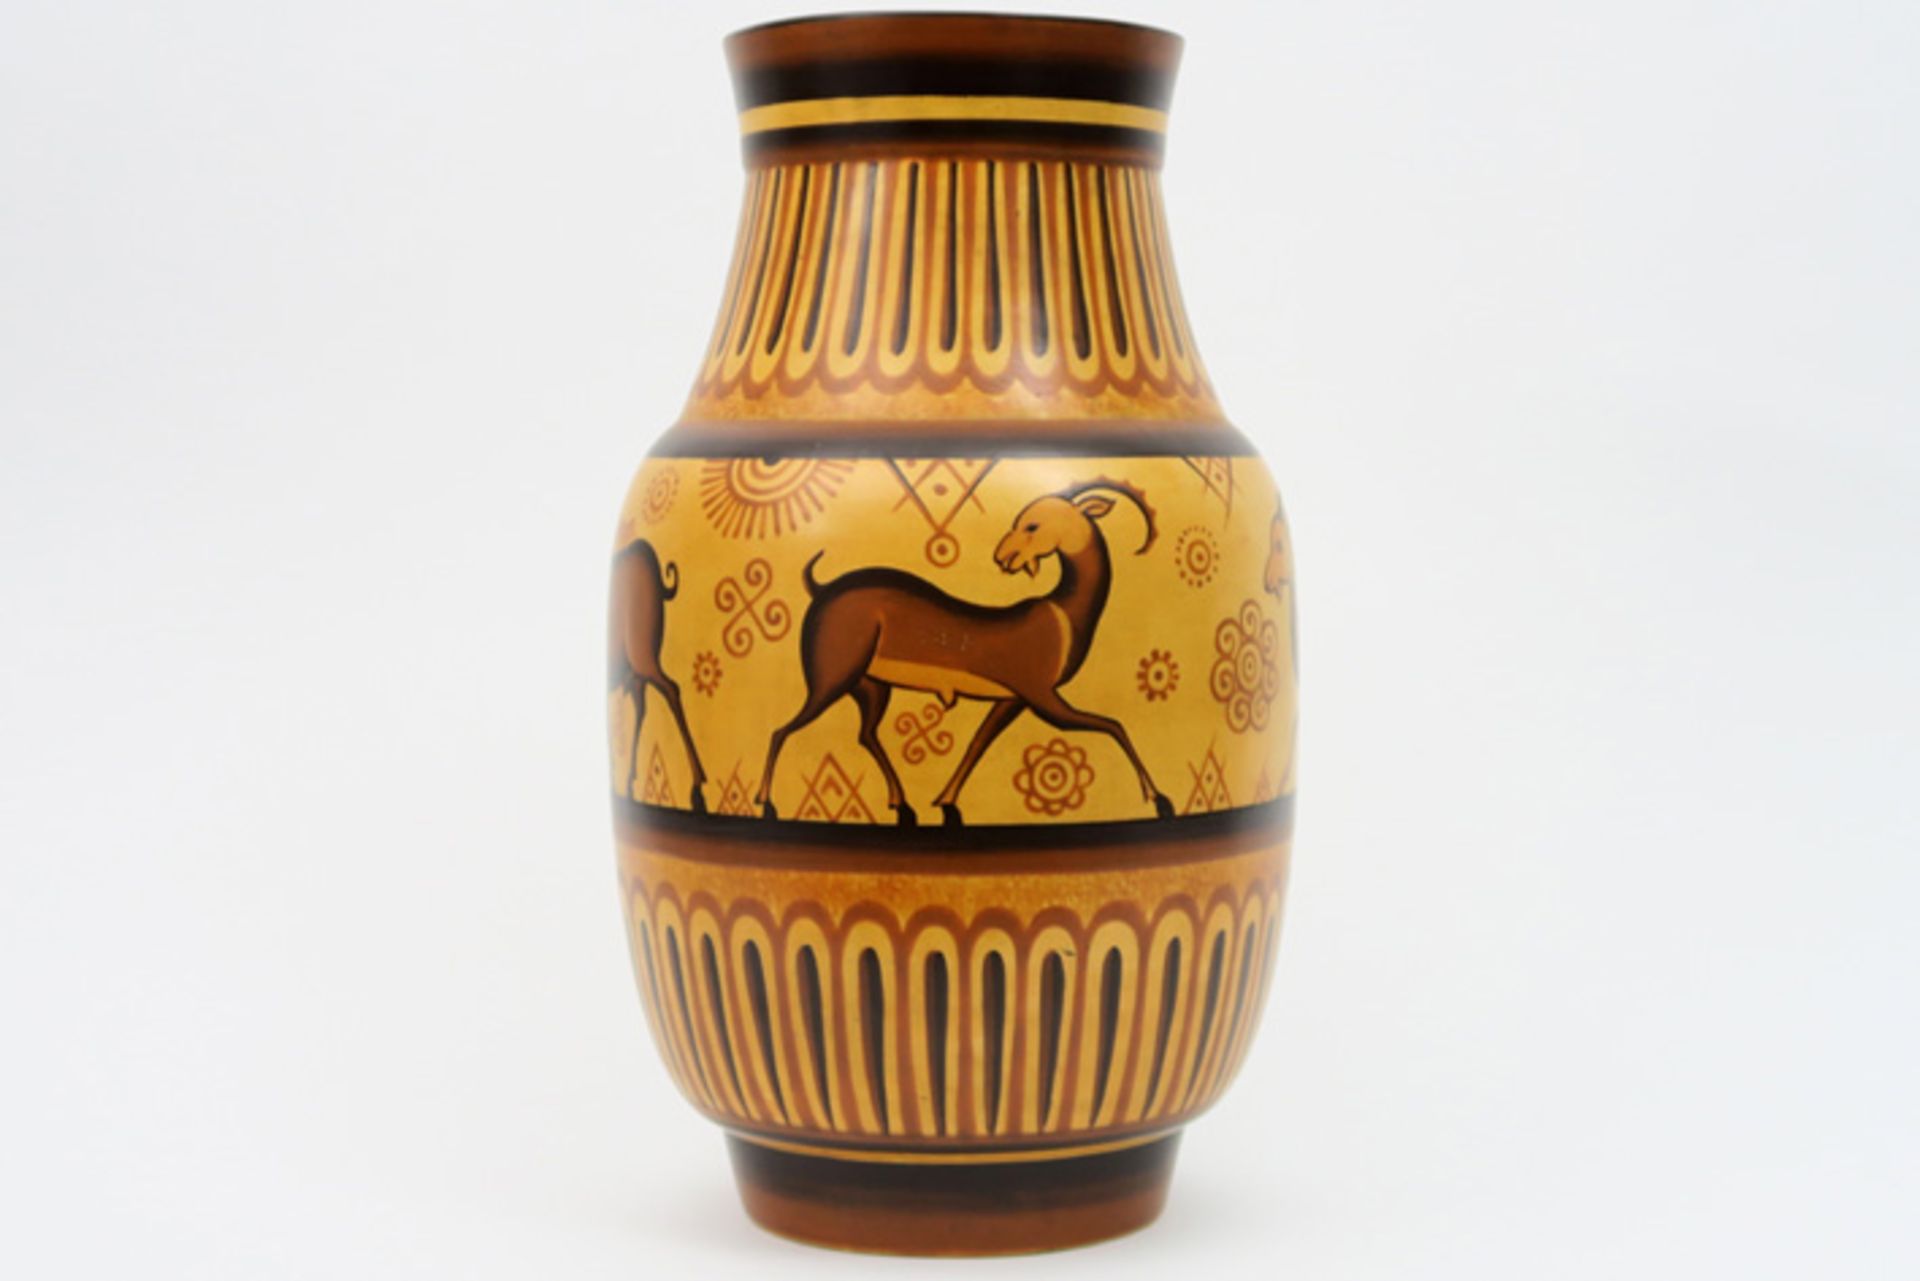 rare "Ch. Catteau" Art Deco-vase in 'Keramis' marked ceramic with a polychrome decor of lionesses - Image 2 of 7